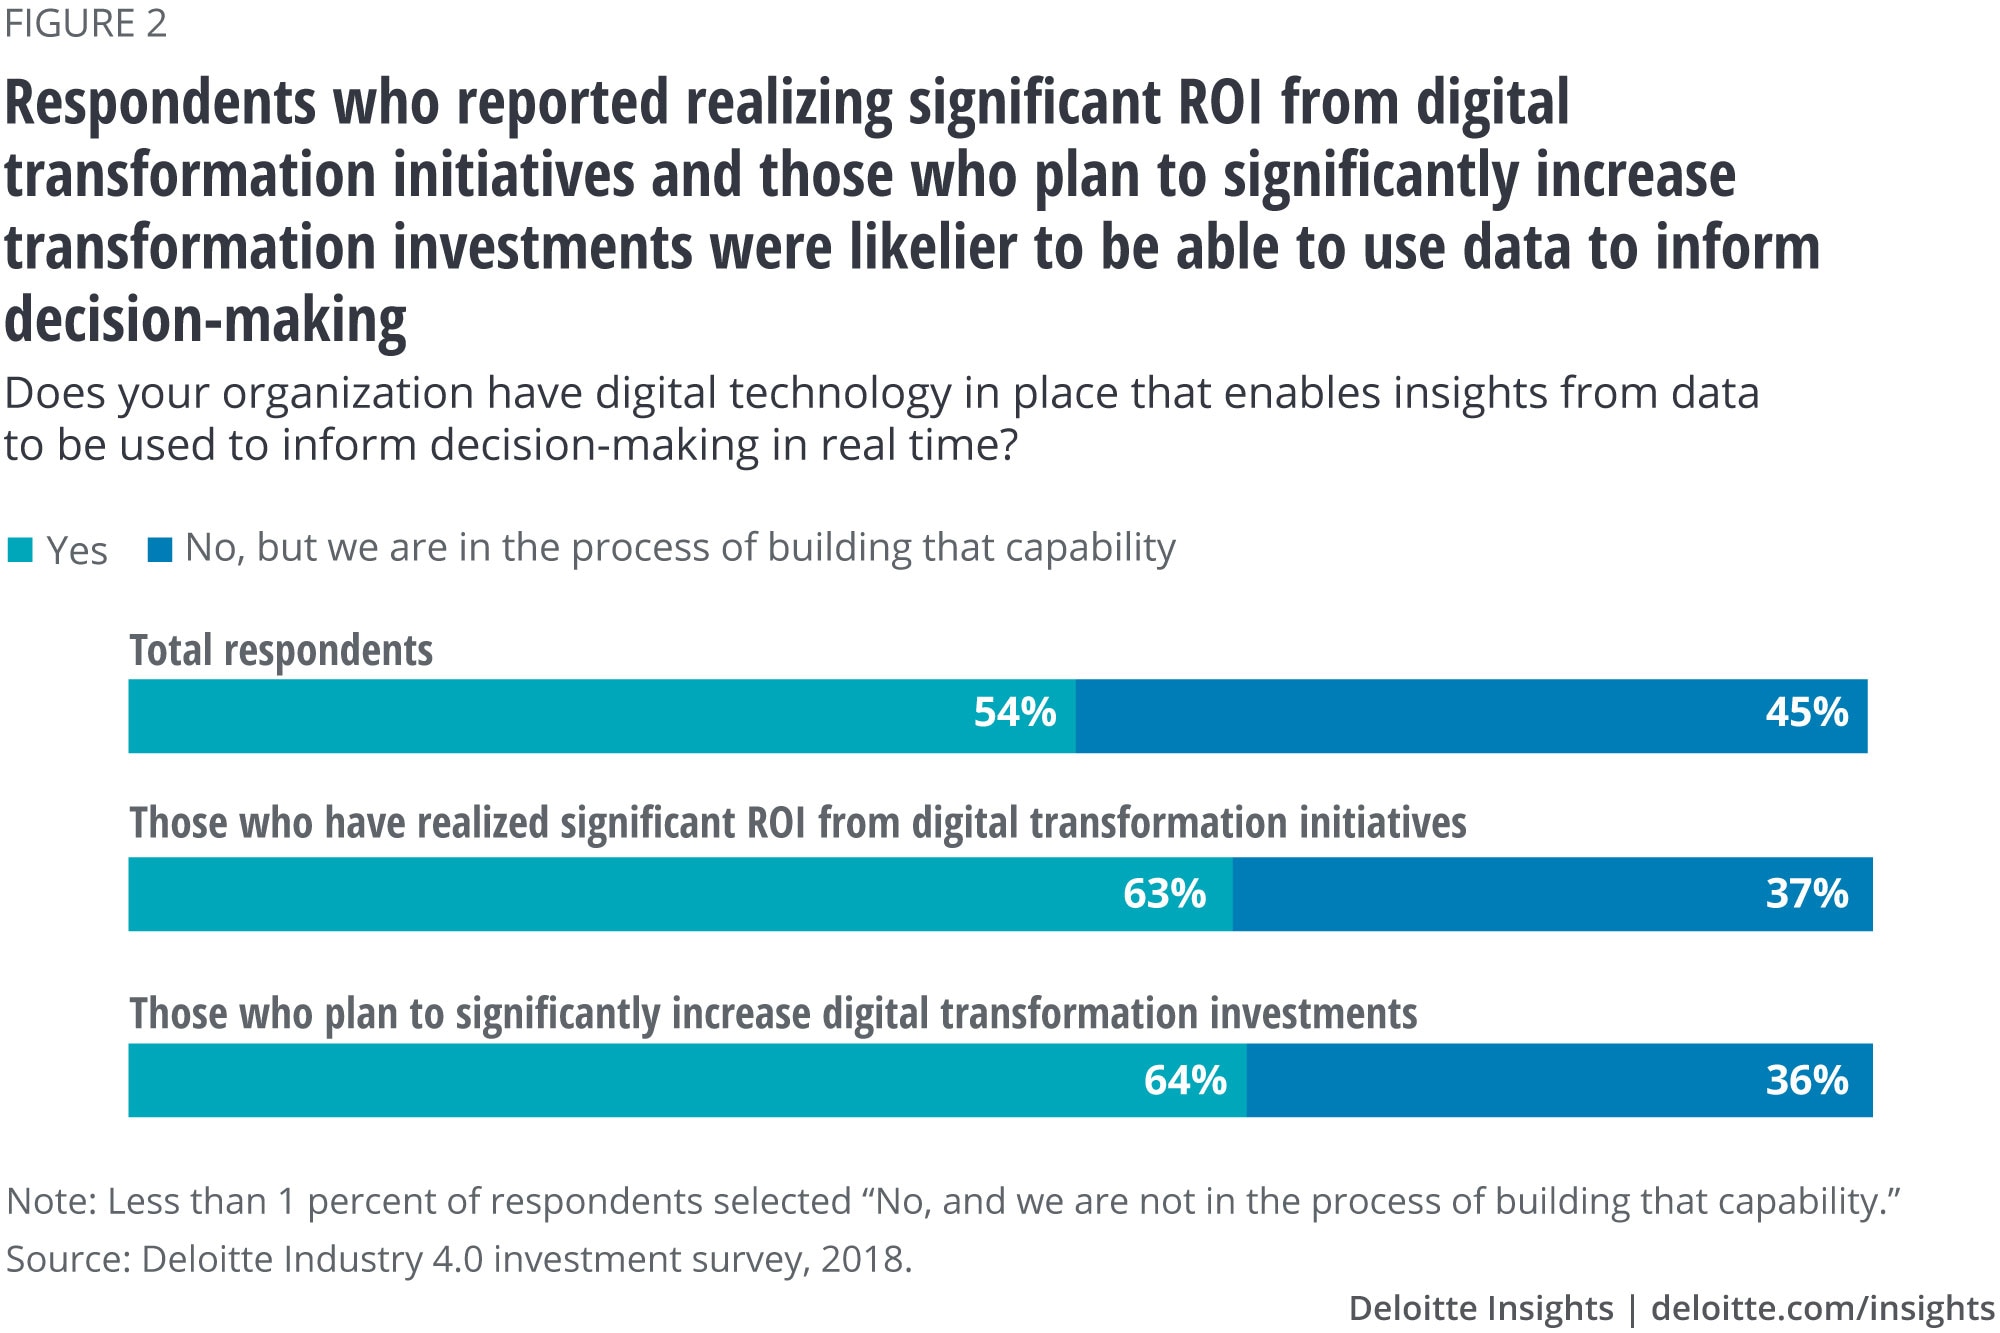 Respondents who reported realizing significant ROI from digital transformation initiatives and those who plan to significantly increase transformation investments were likelier to be able to use data to inform decision-making